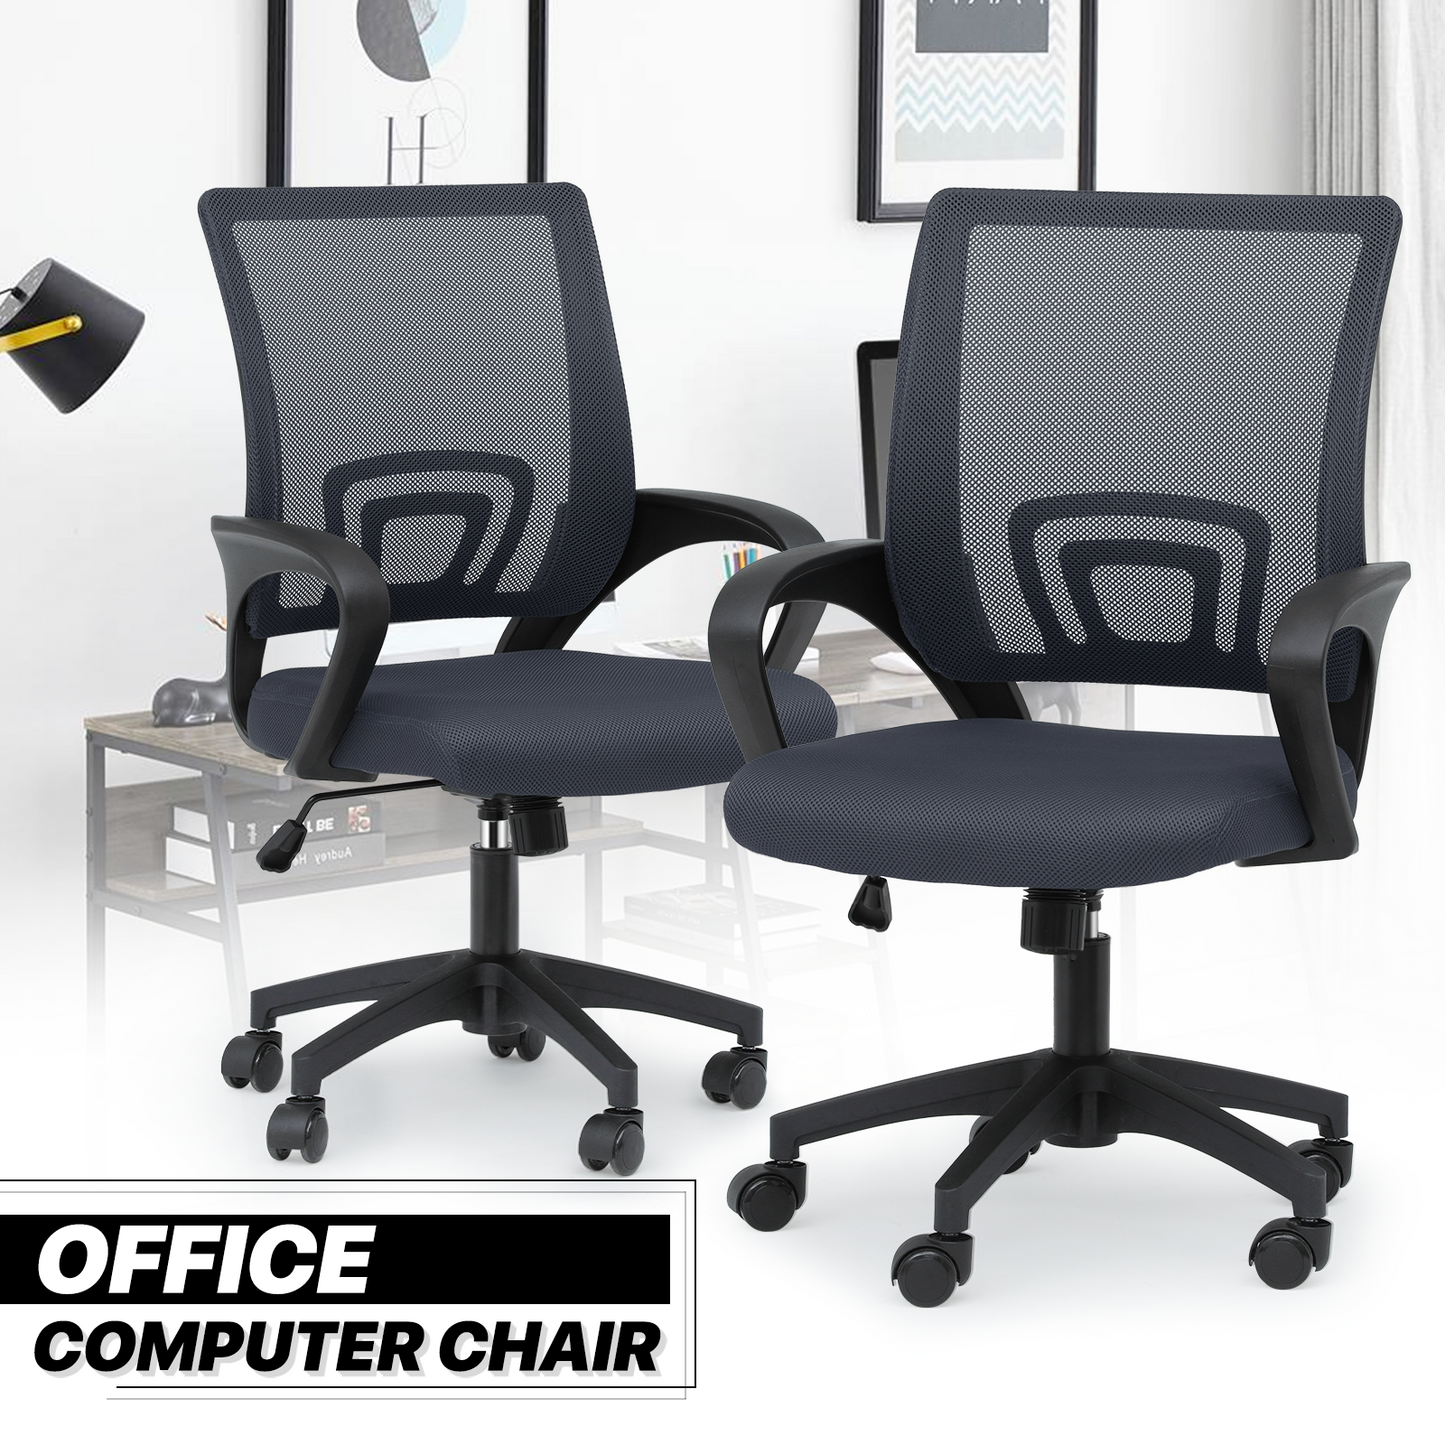 Adjustable Height Office Chair - 18" Seat Wide - Mesh Back